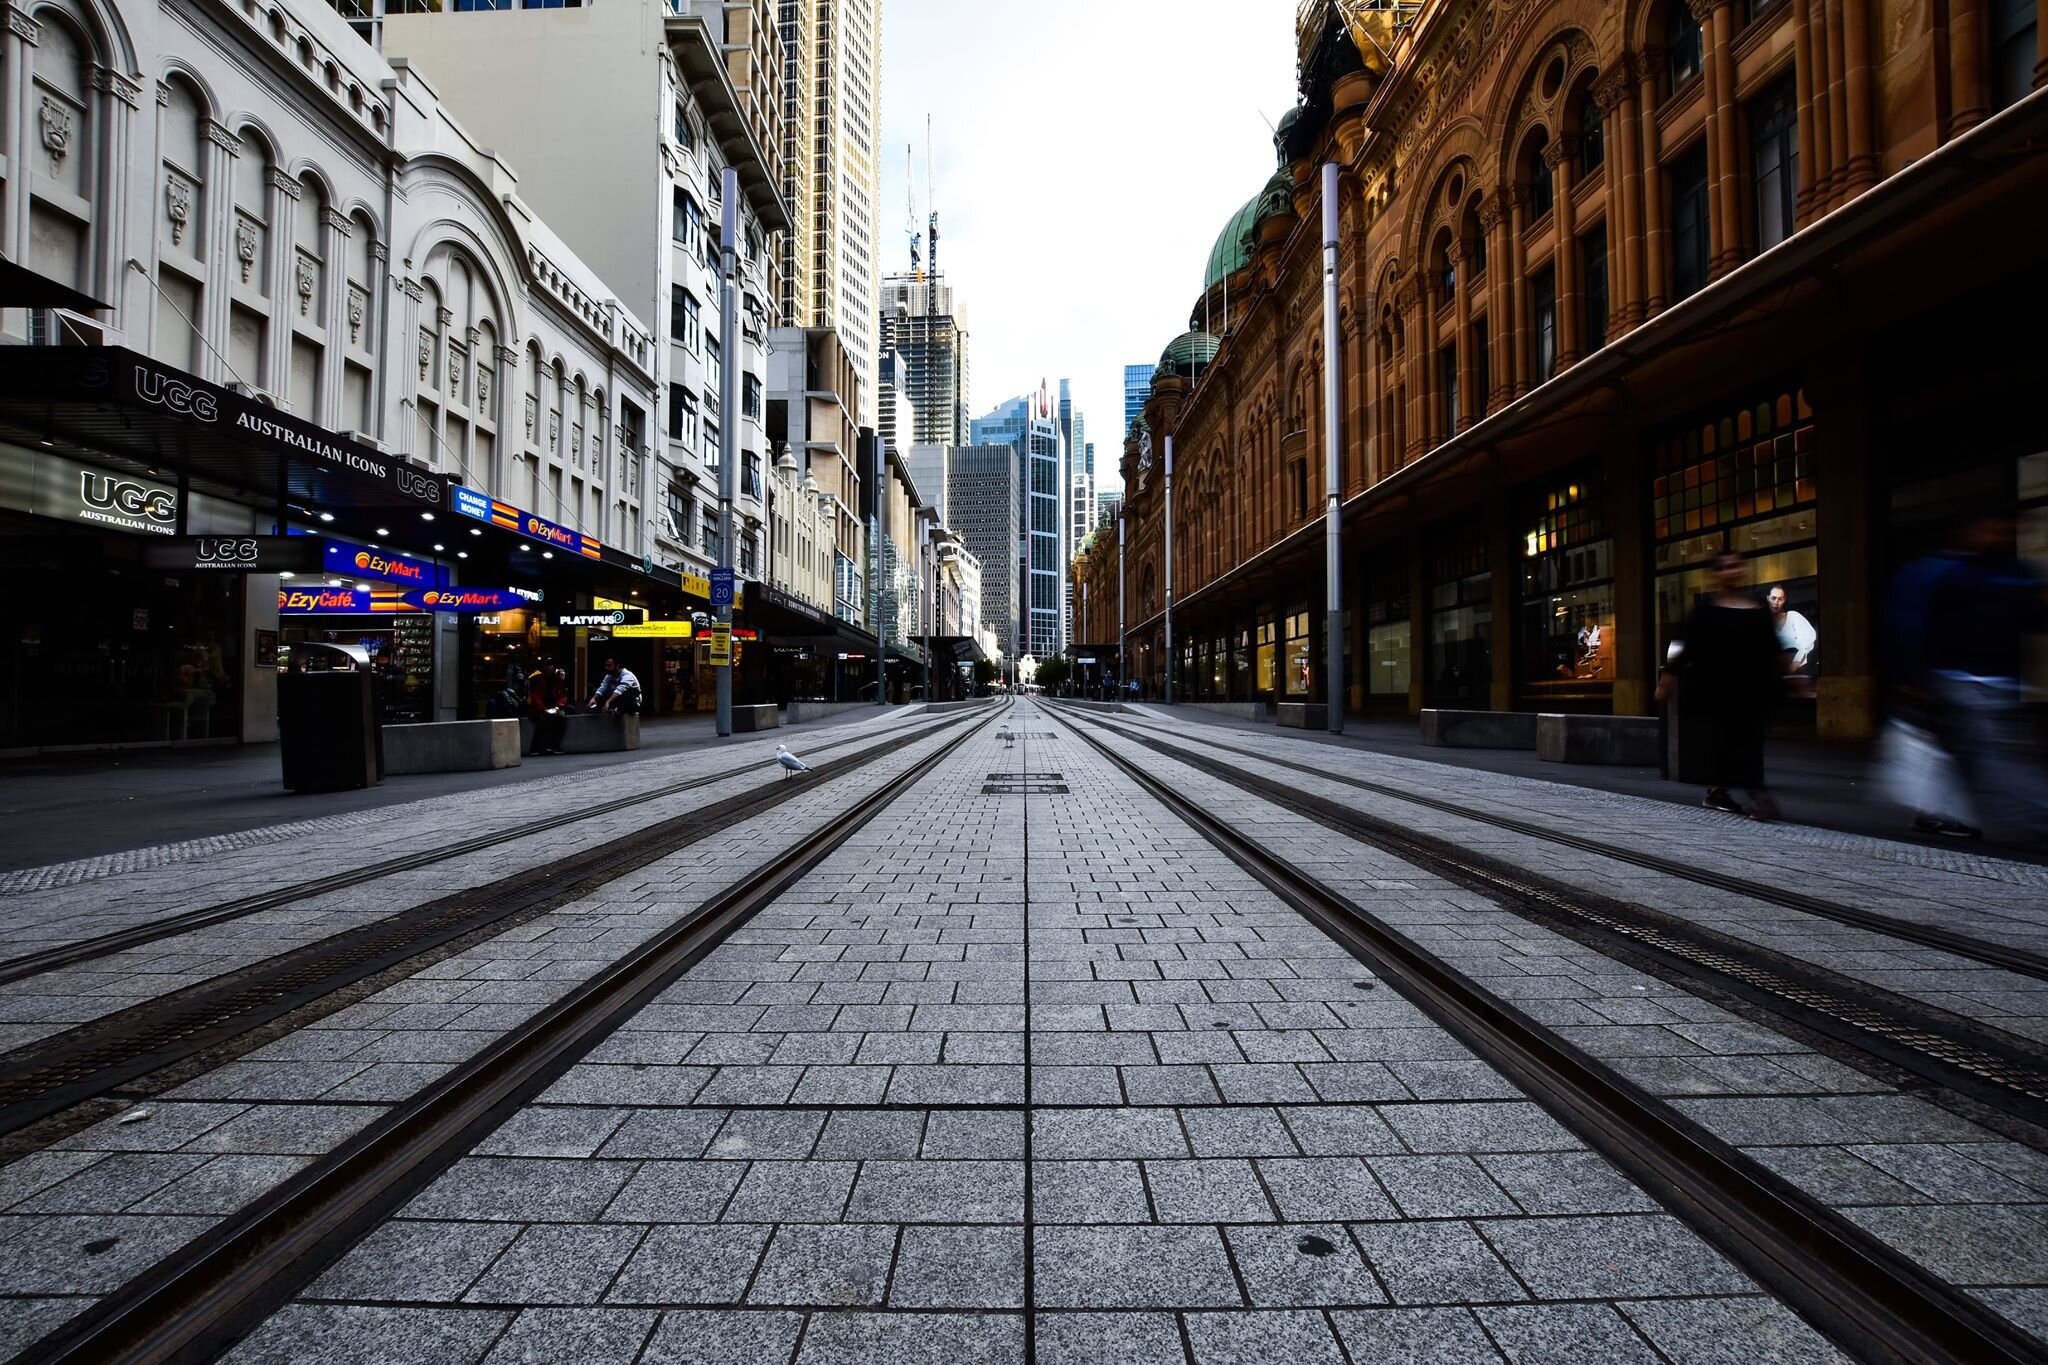 Alongside the QVB once more the city appears as a giant diorama, overseen but uninhabited. Picture: Mark Kriedemann/Trademark Photography